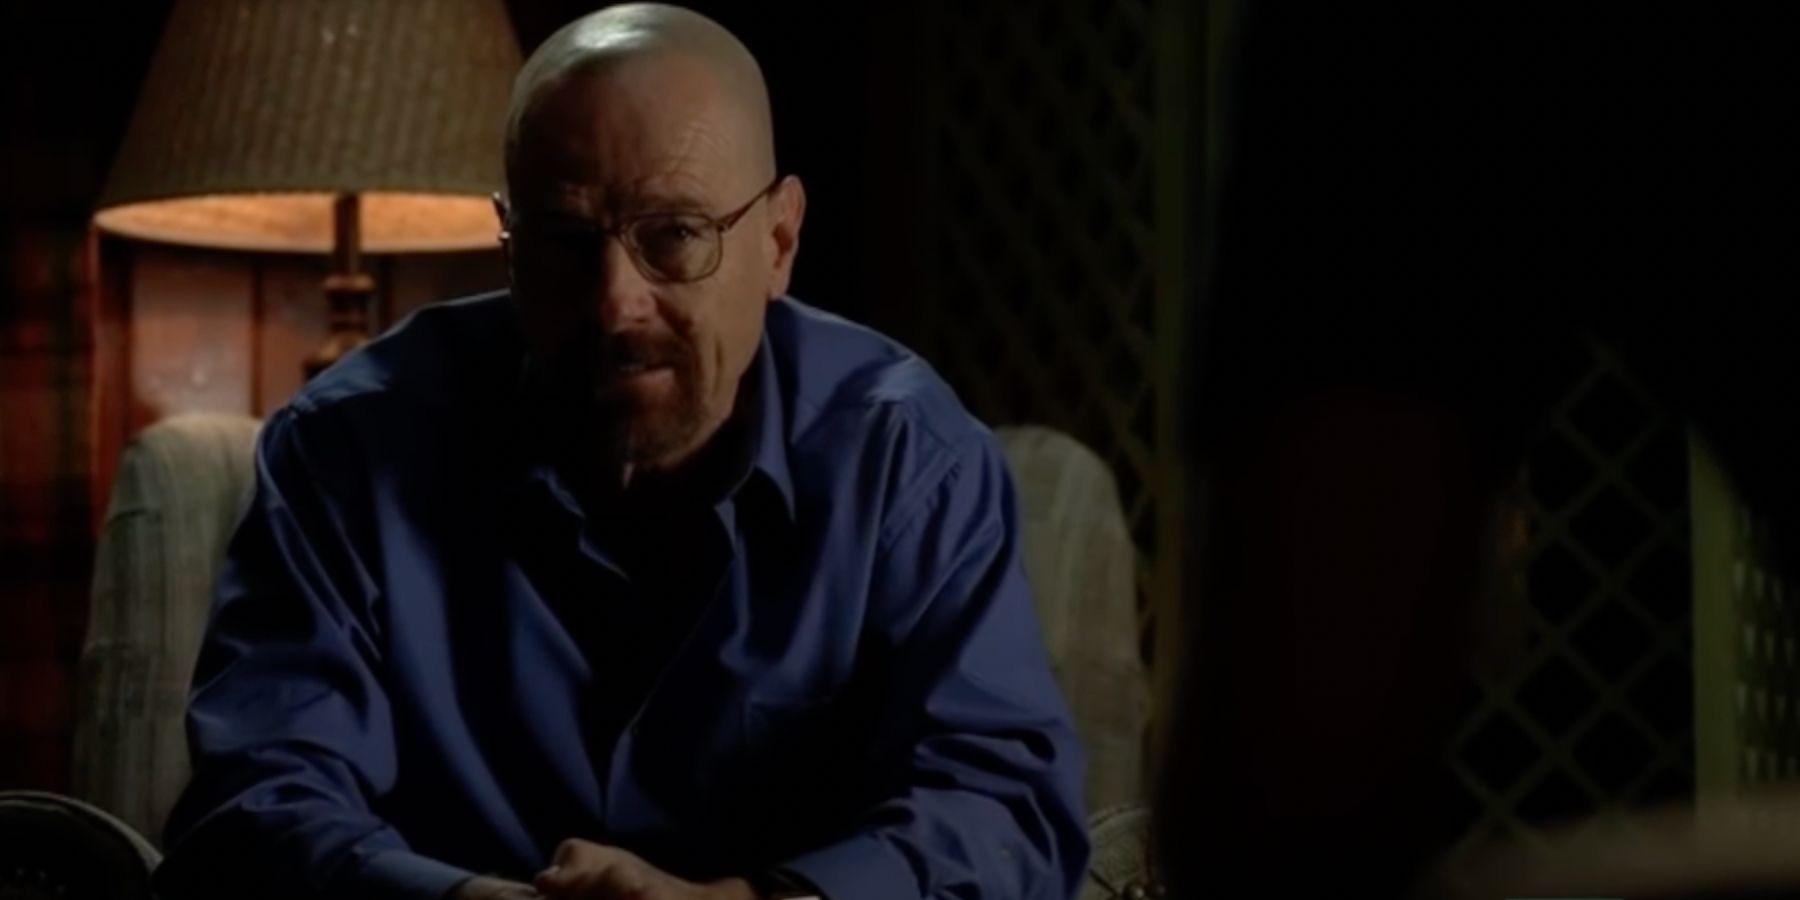 Walter White sits in his lounge room, telling Jesse about how he sold his share in Gray Matter.